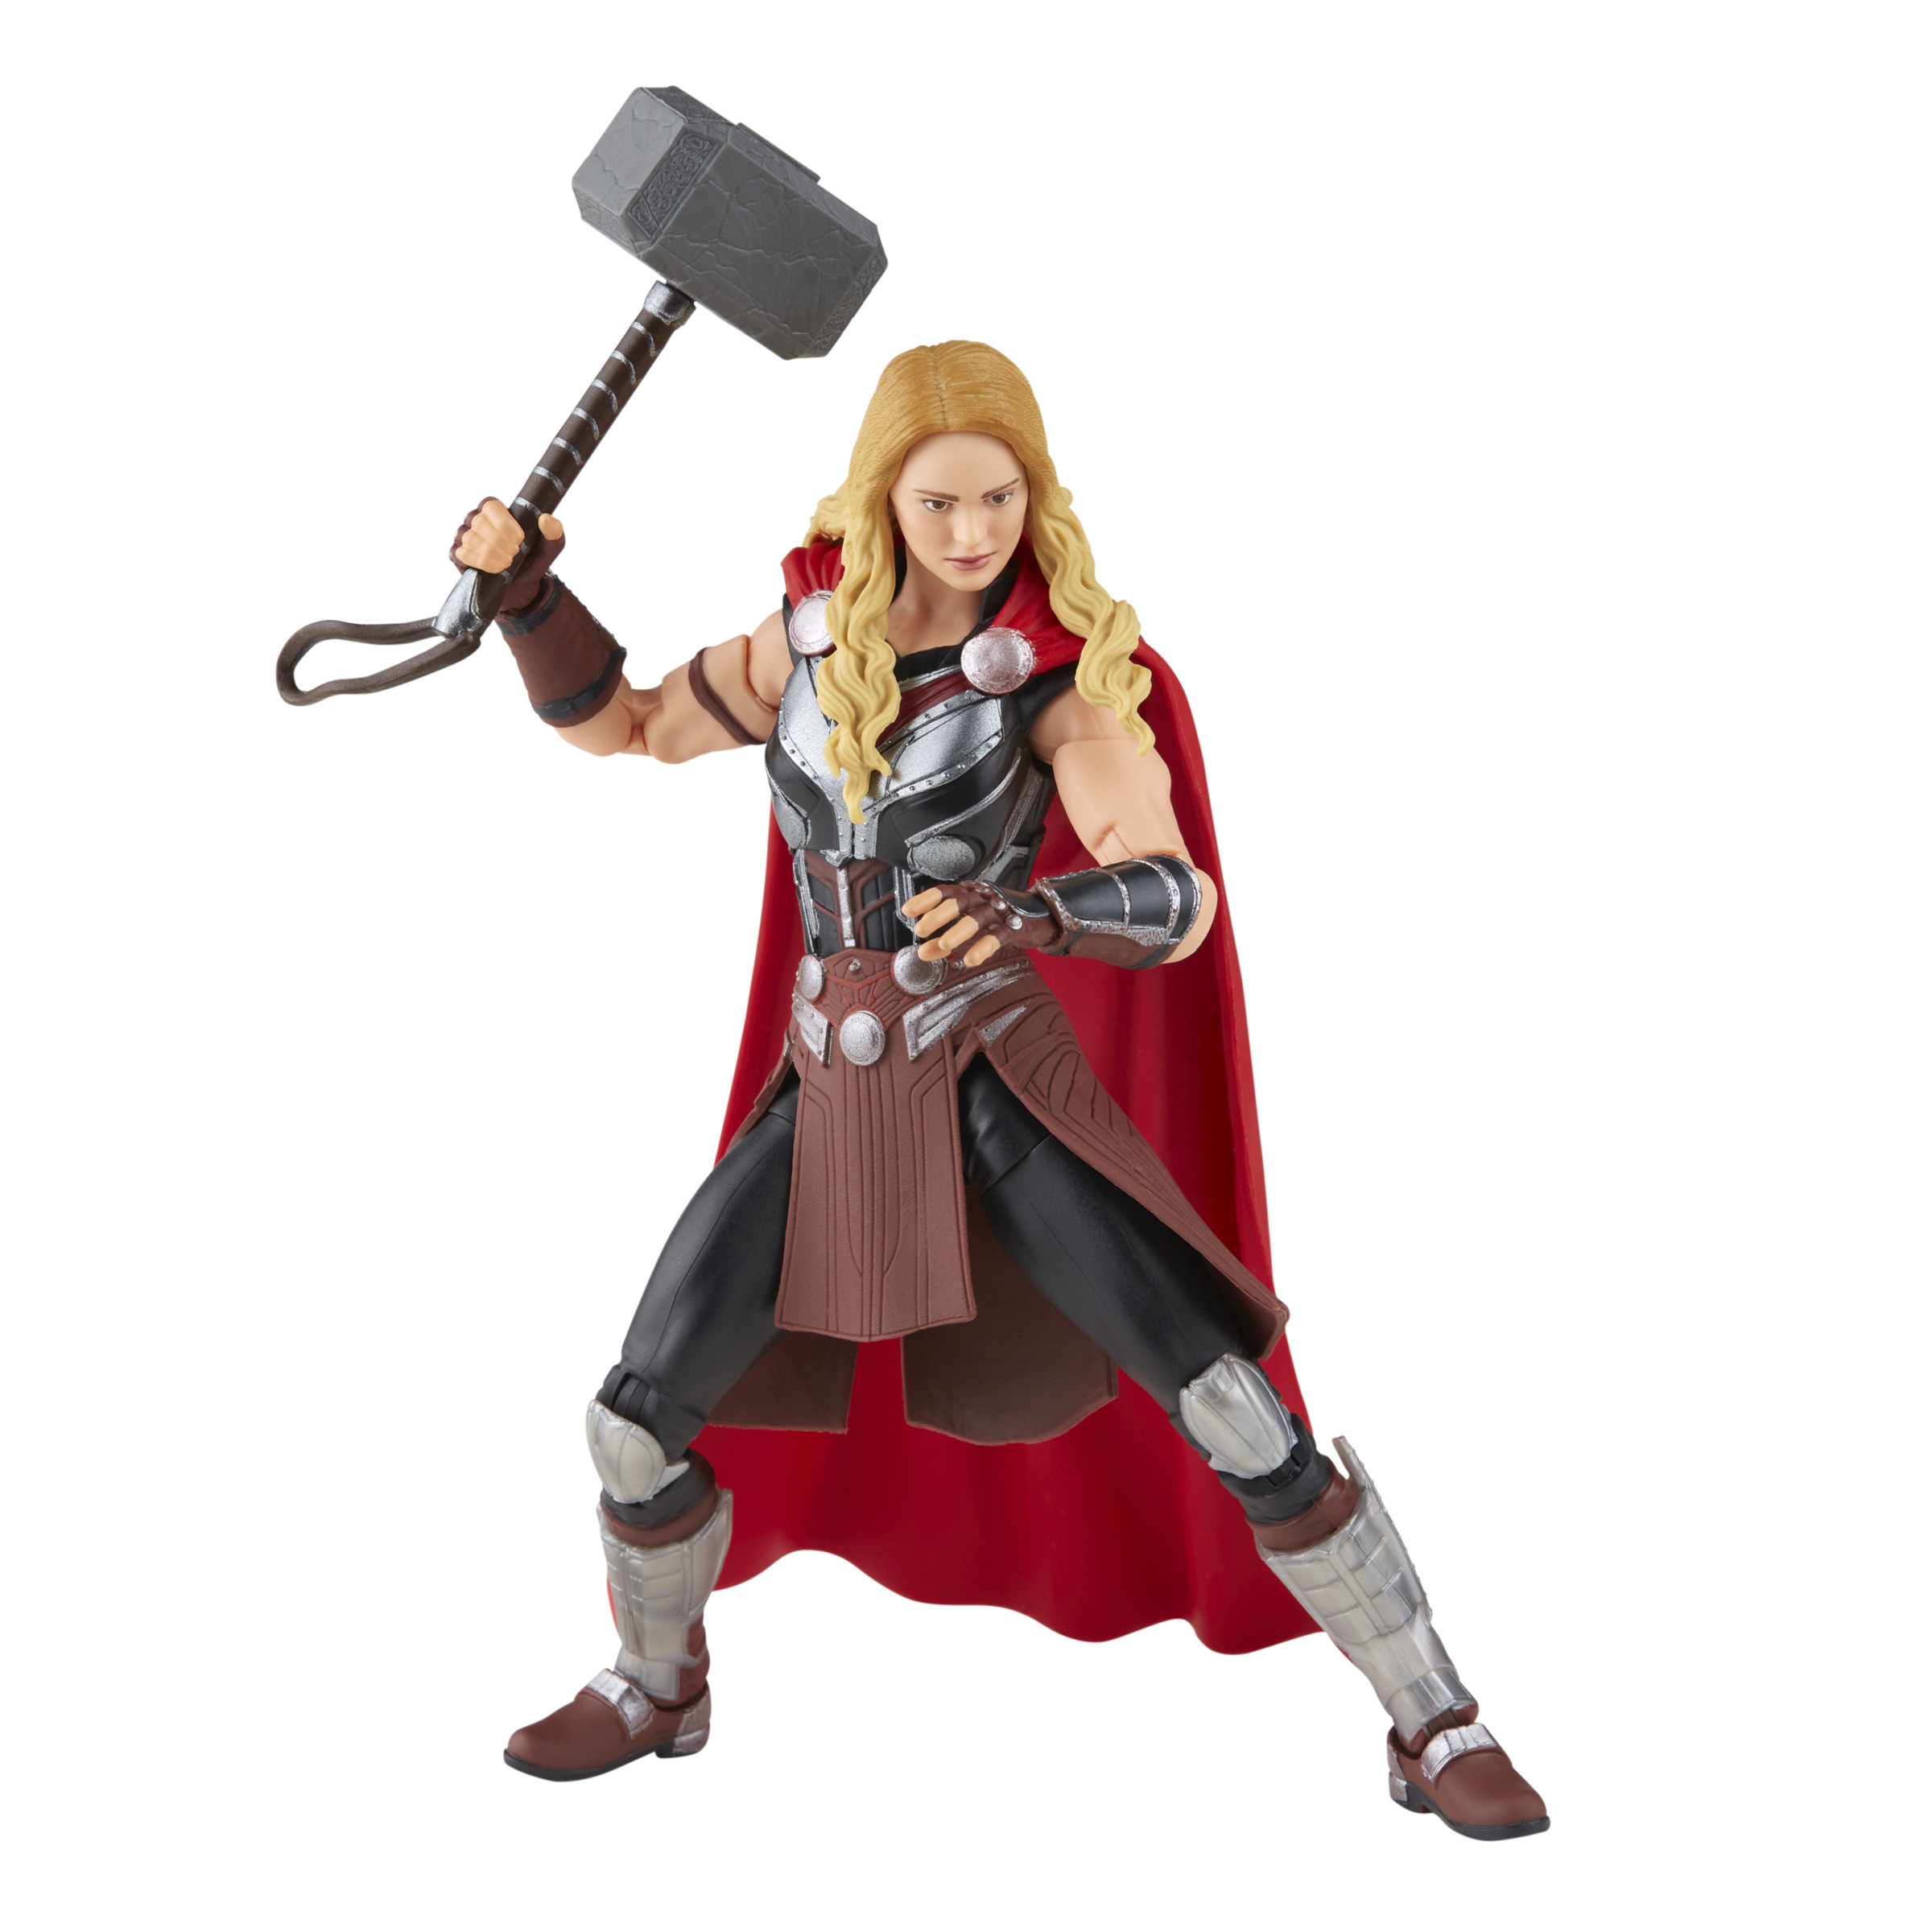 THOR: LOVE AND THUNDER toys reveal first look at Christian Bale's Gorr, the  God Butcher